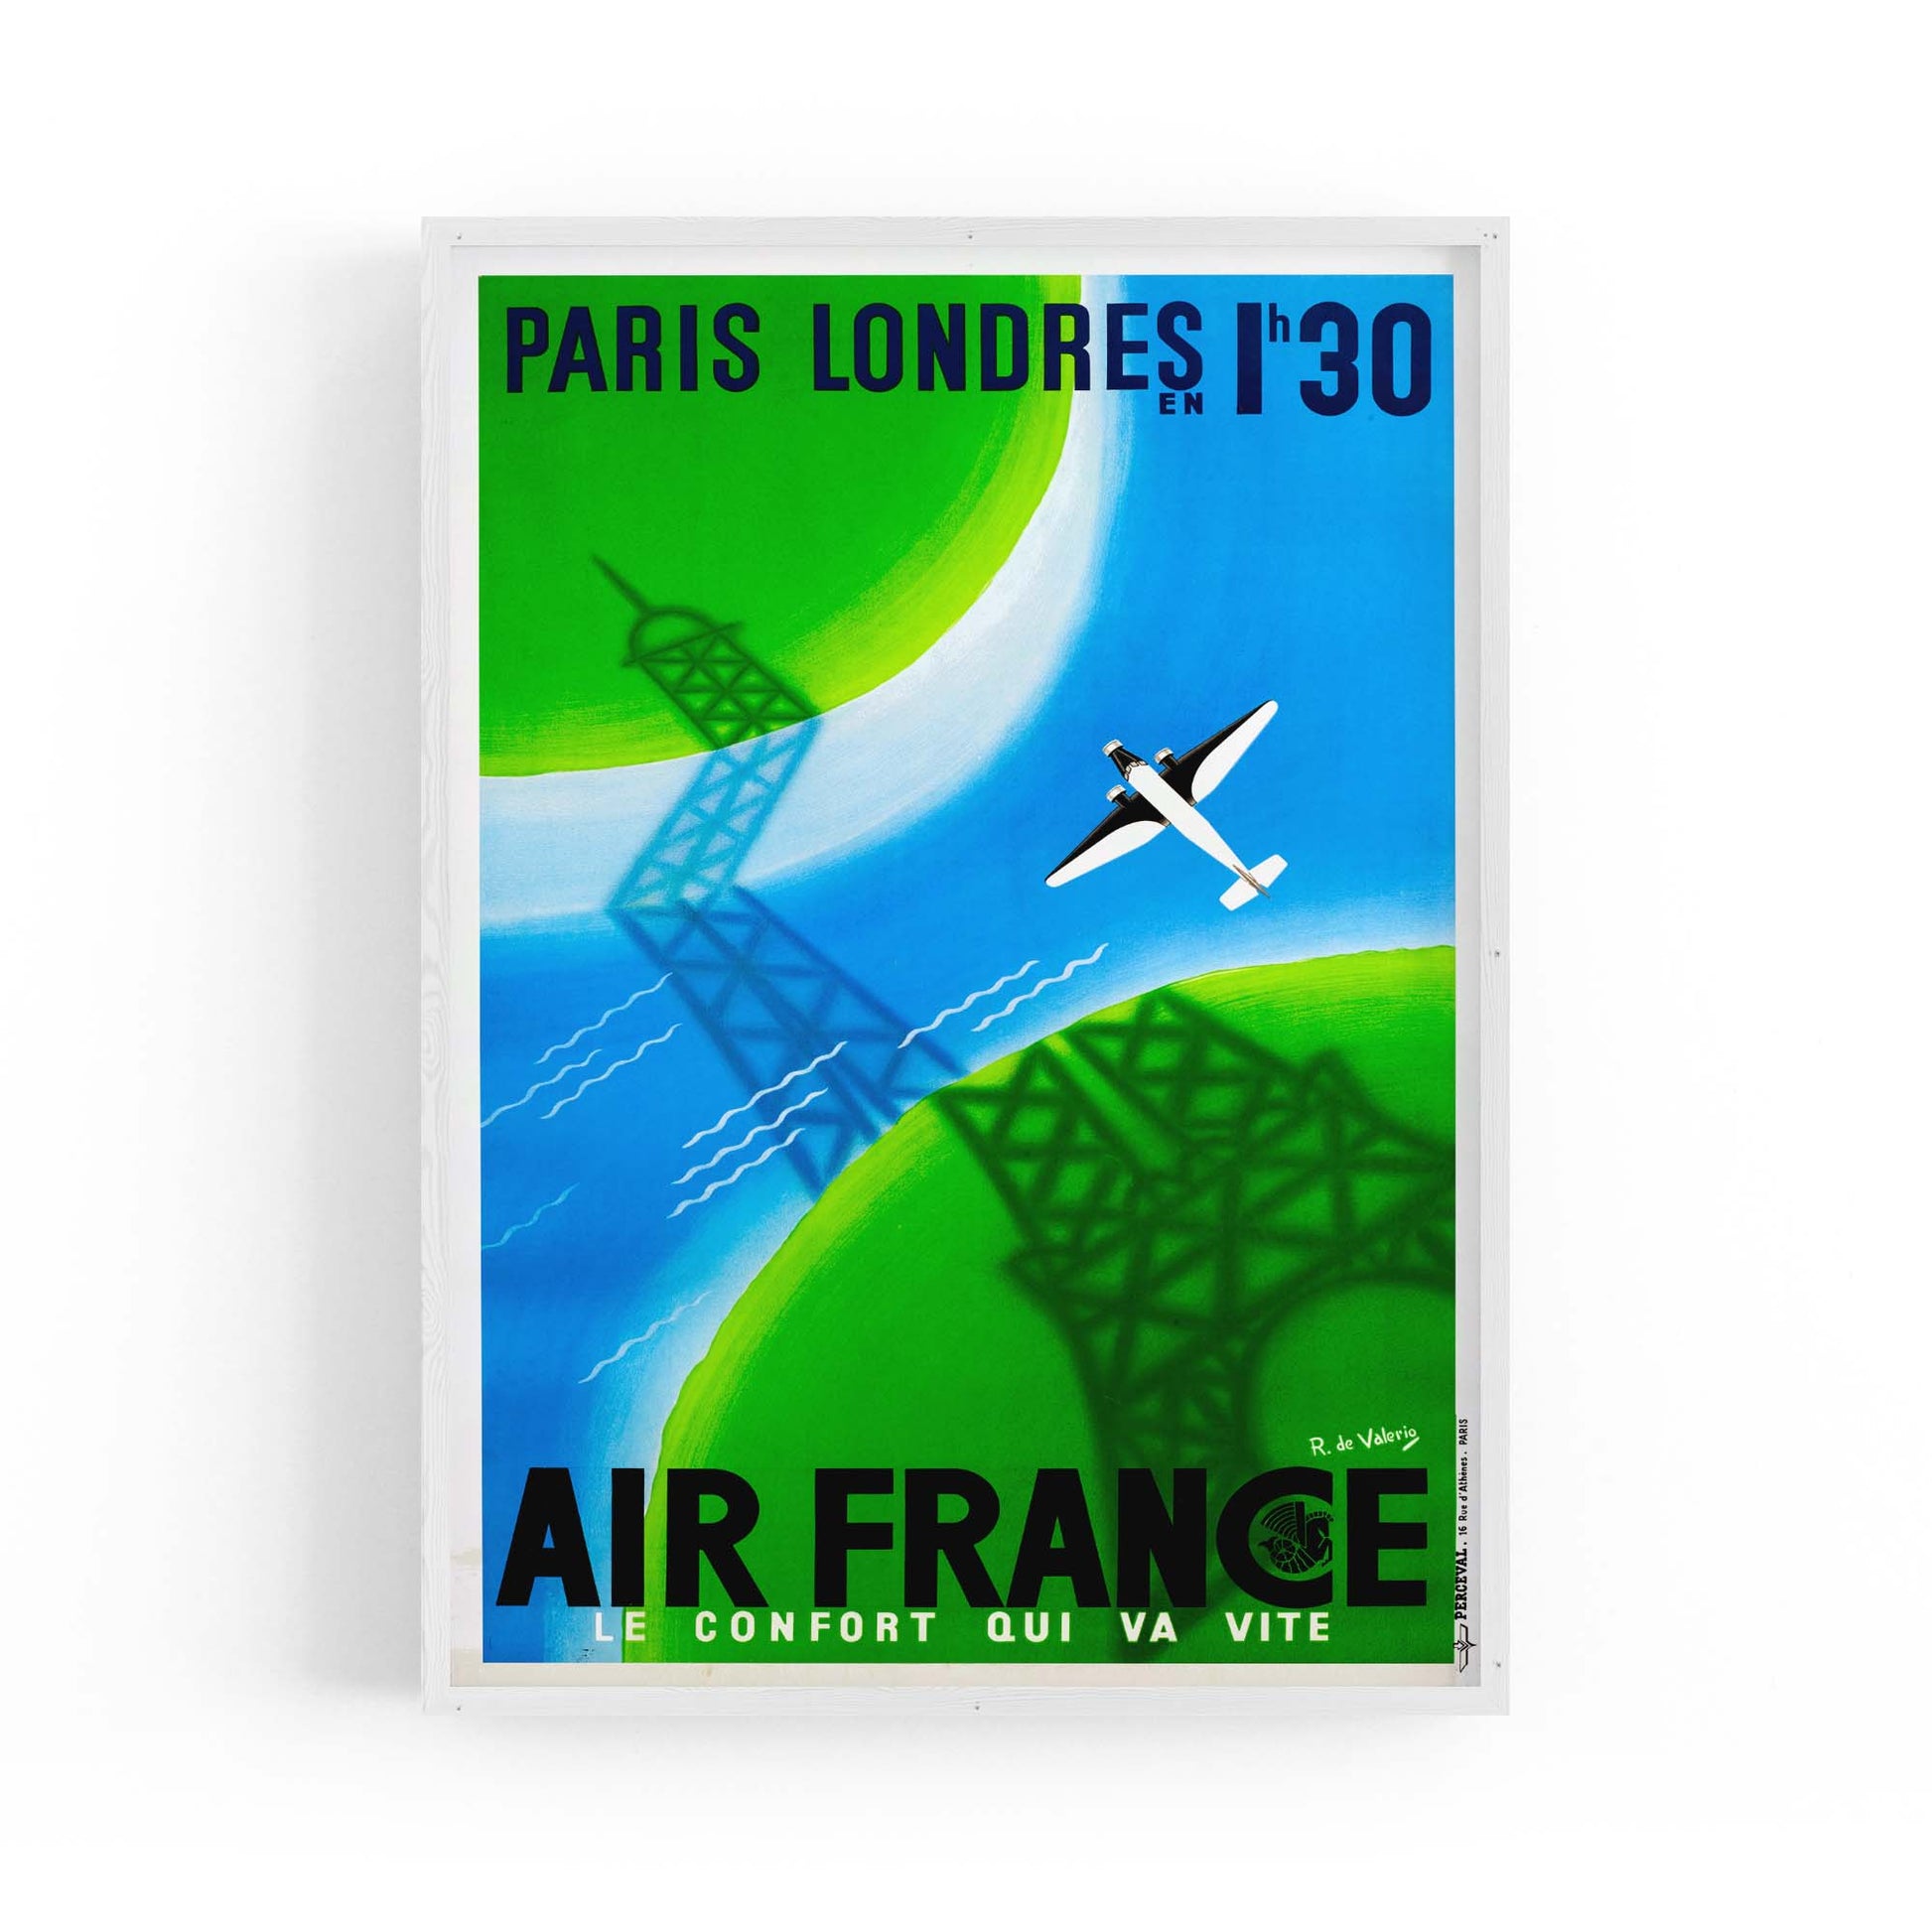 Air France - Paris to London Vintage Advert Wall Art - The Affordable Art Company